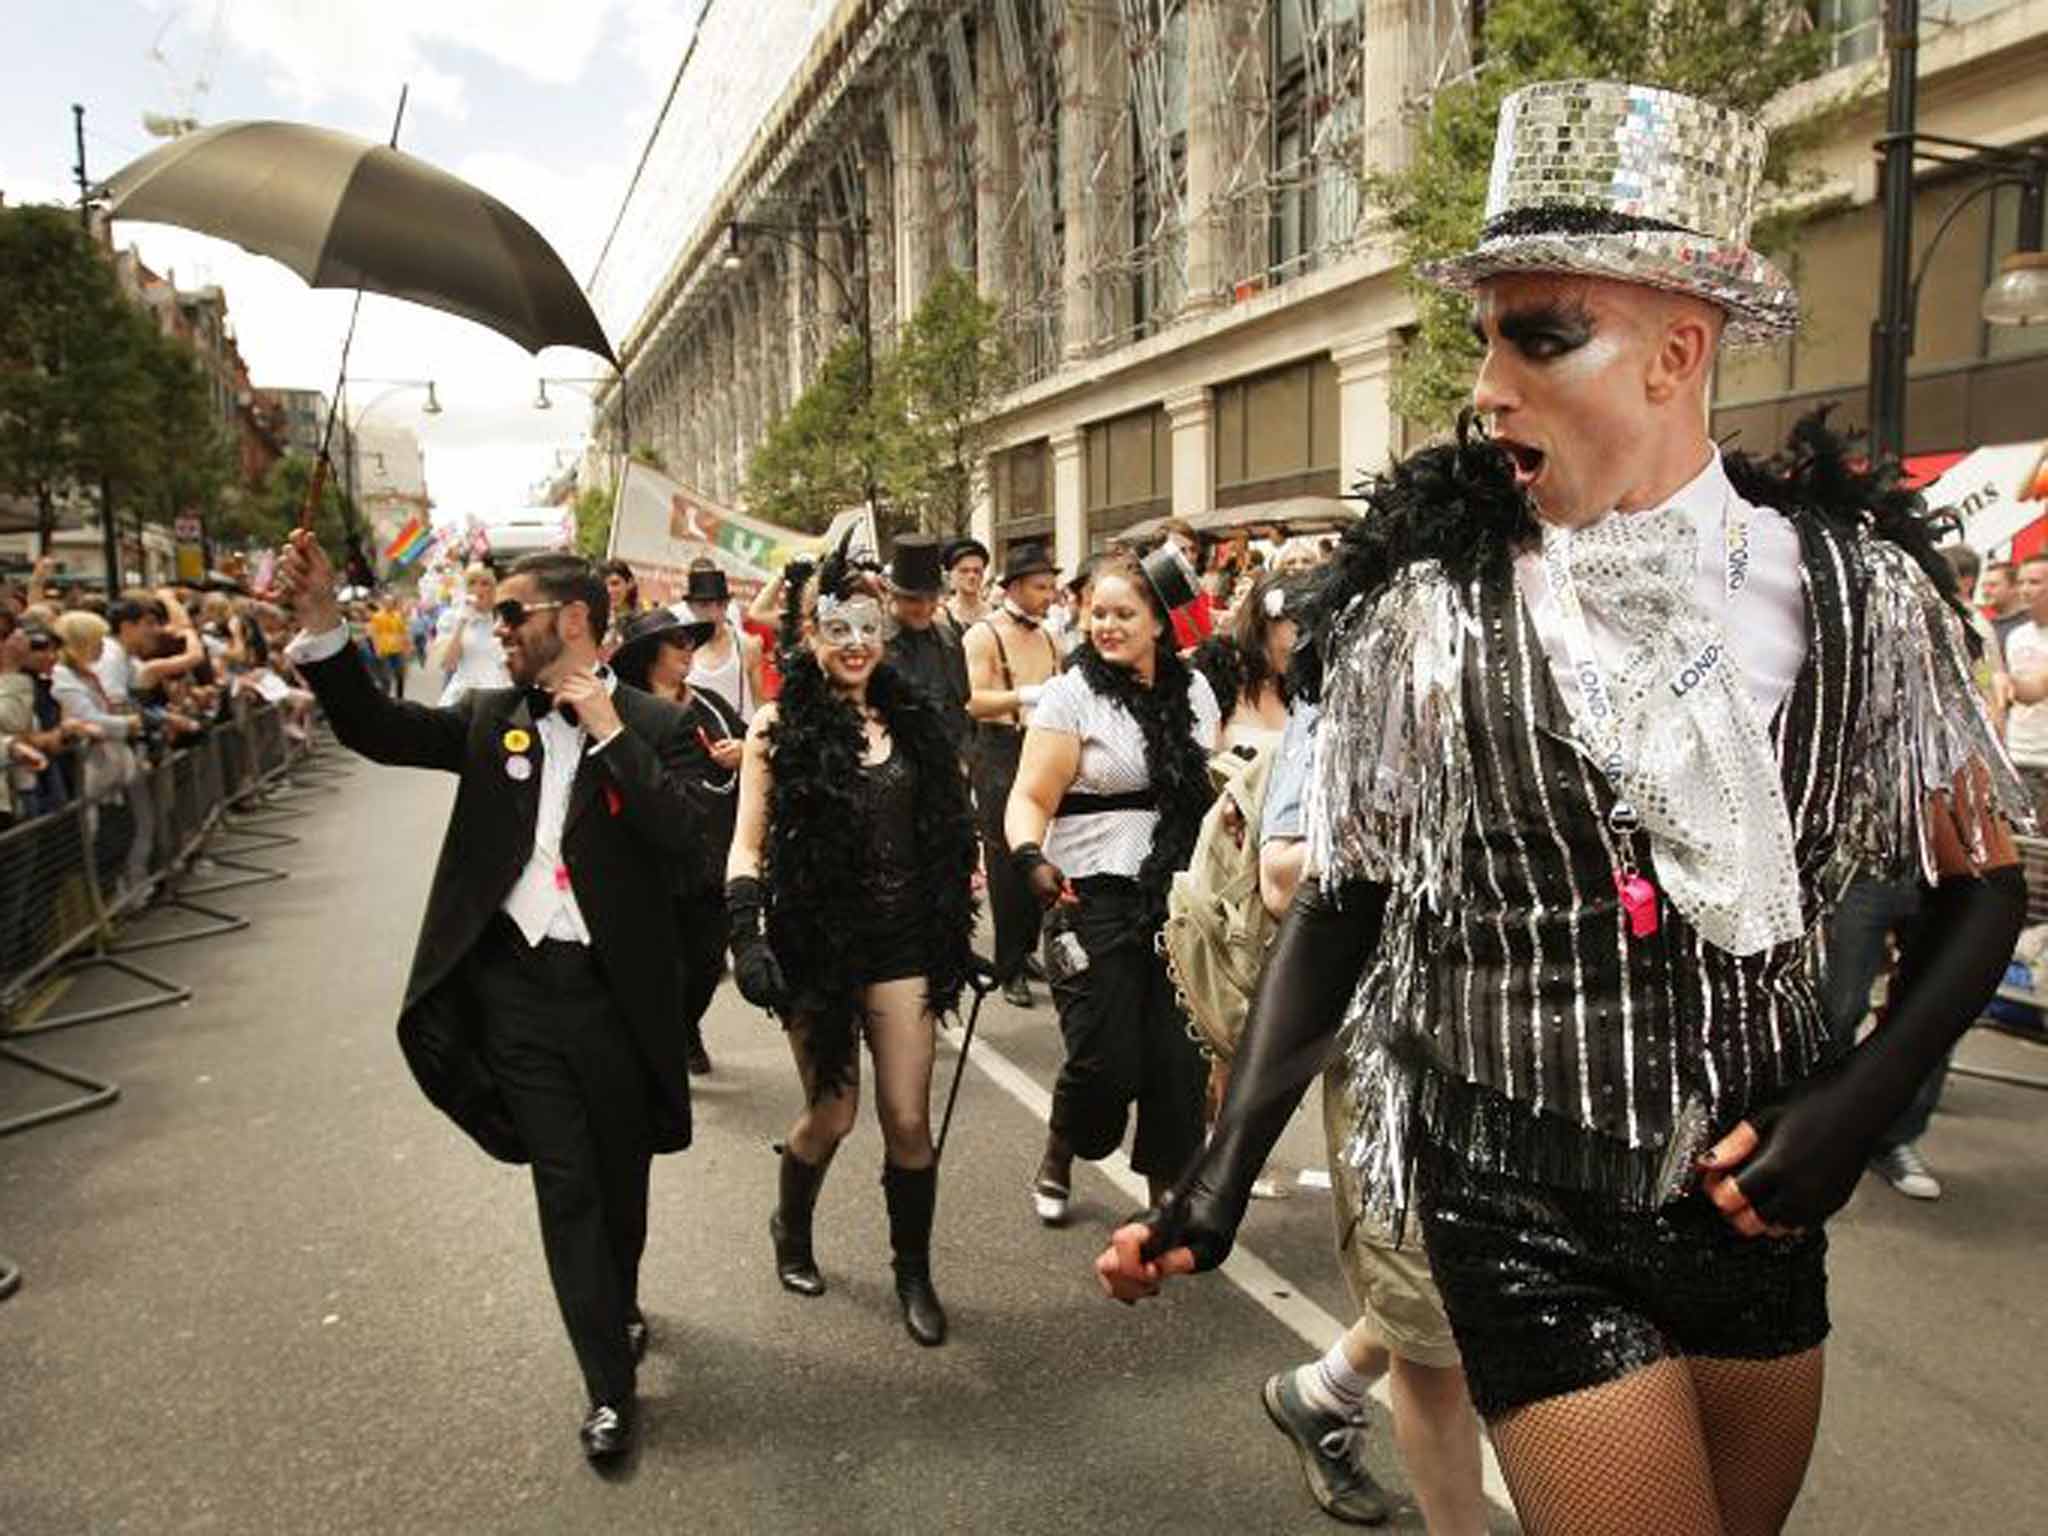 Loud and proud: gay pride celebrations in London